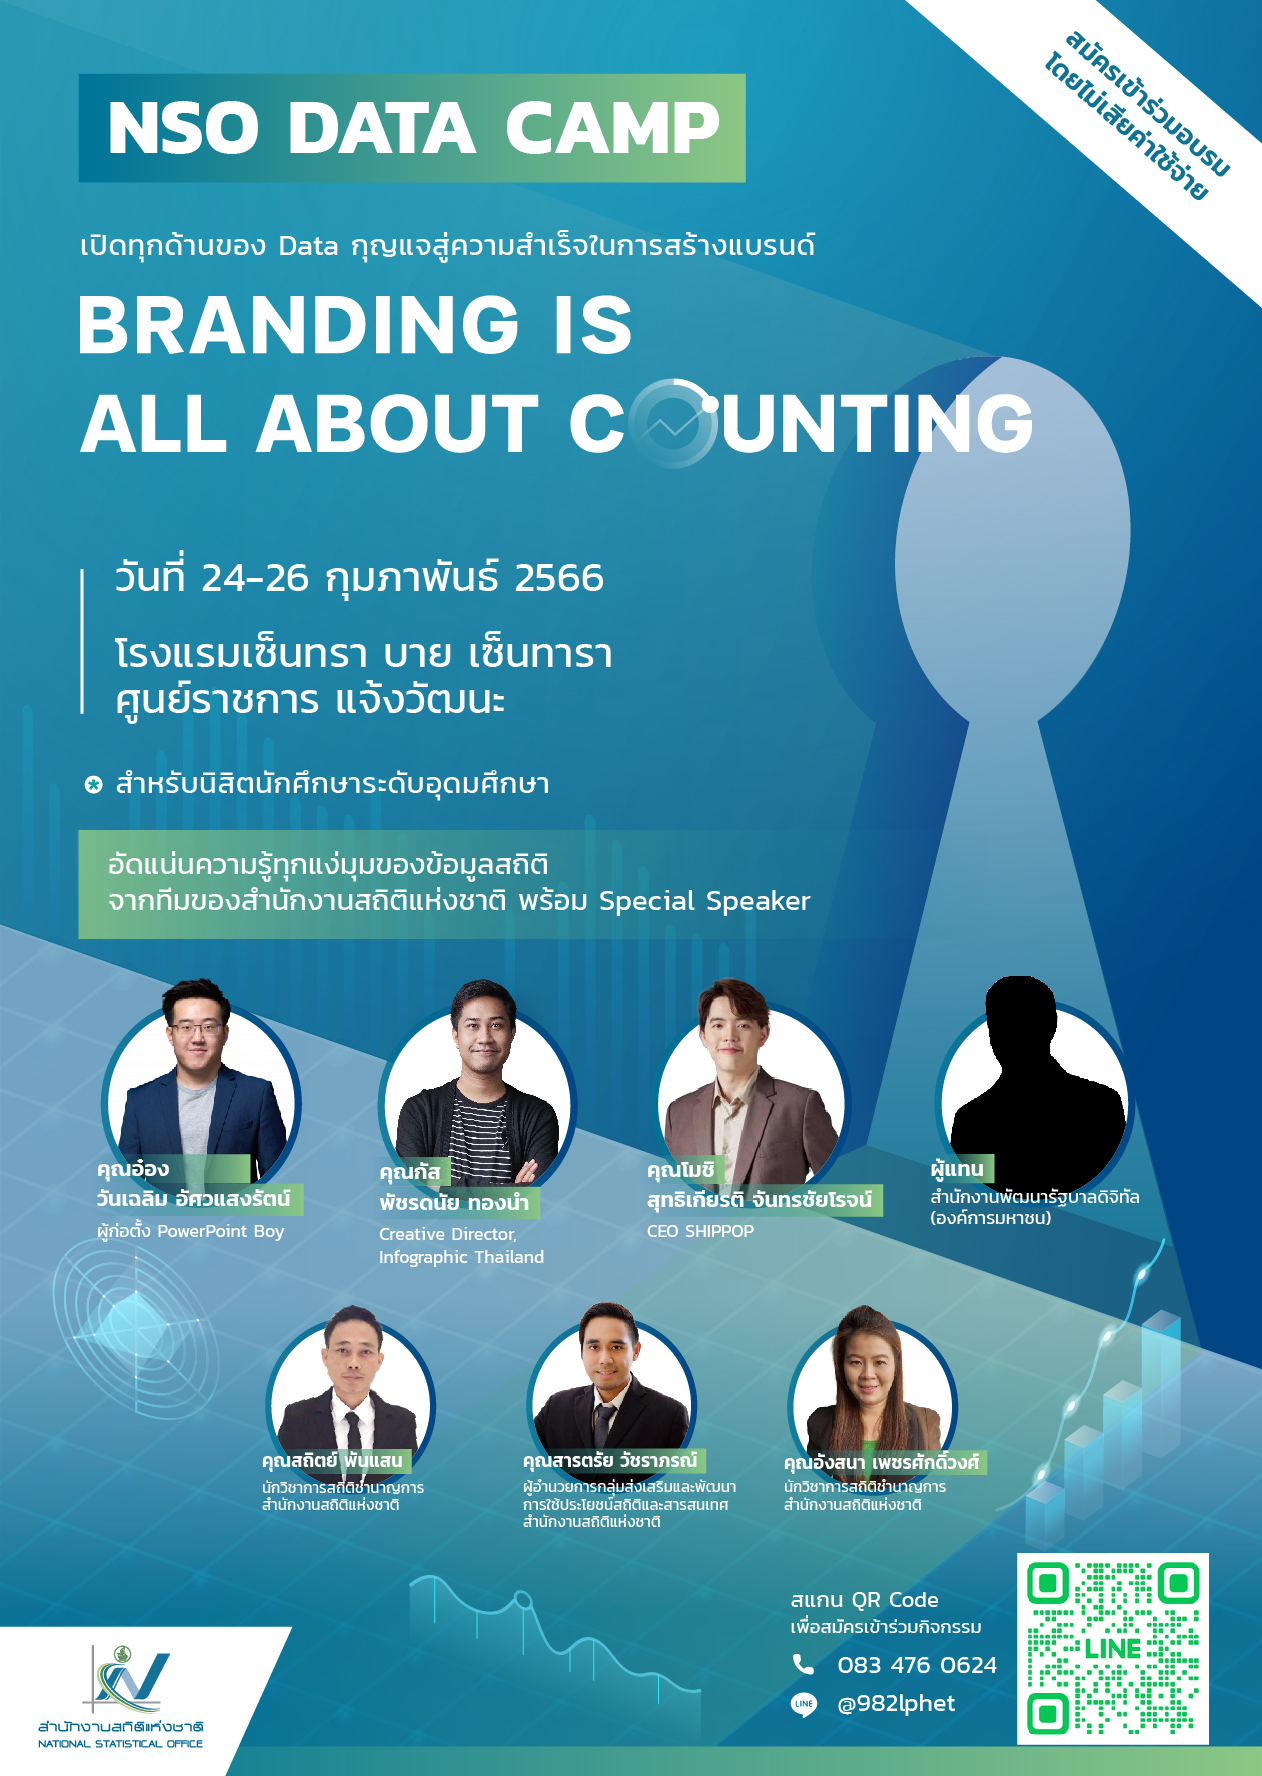 NSO Data Camp  หัวข้อ “Branding is all about Counting”